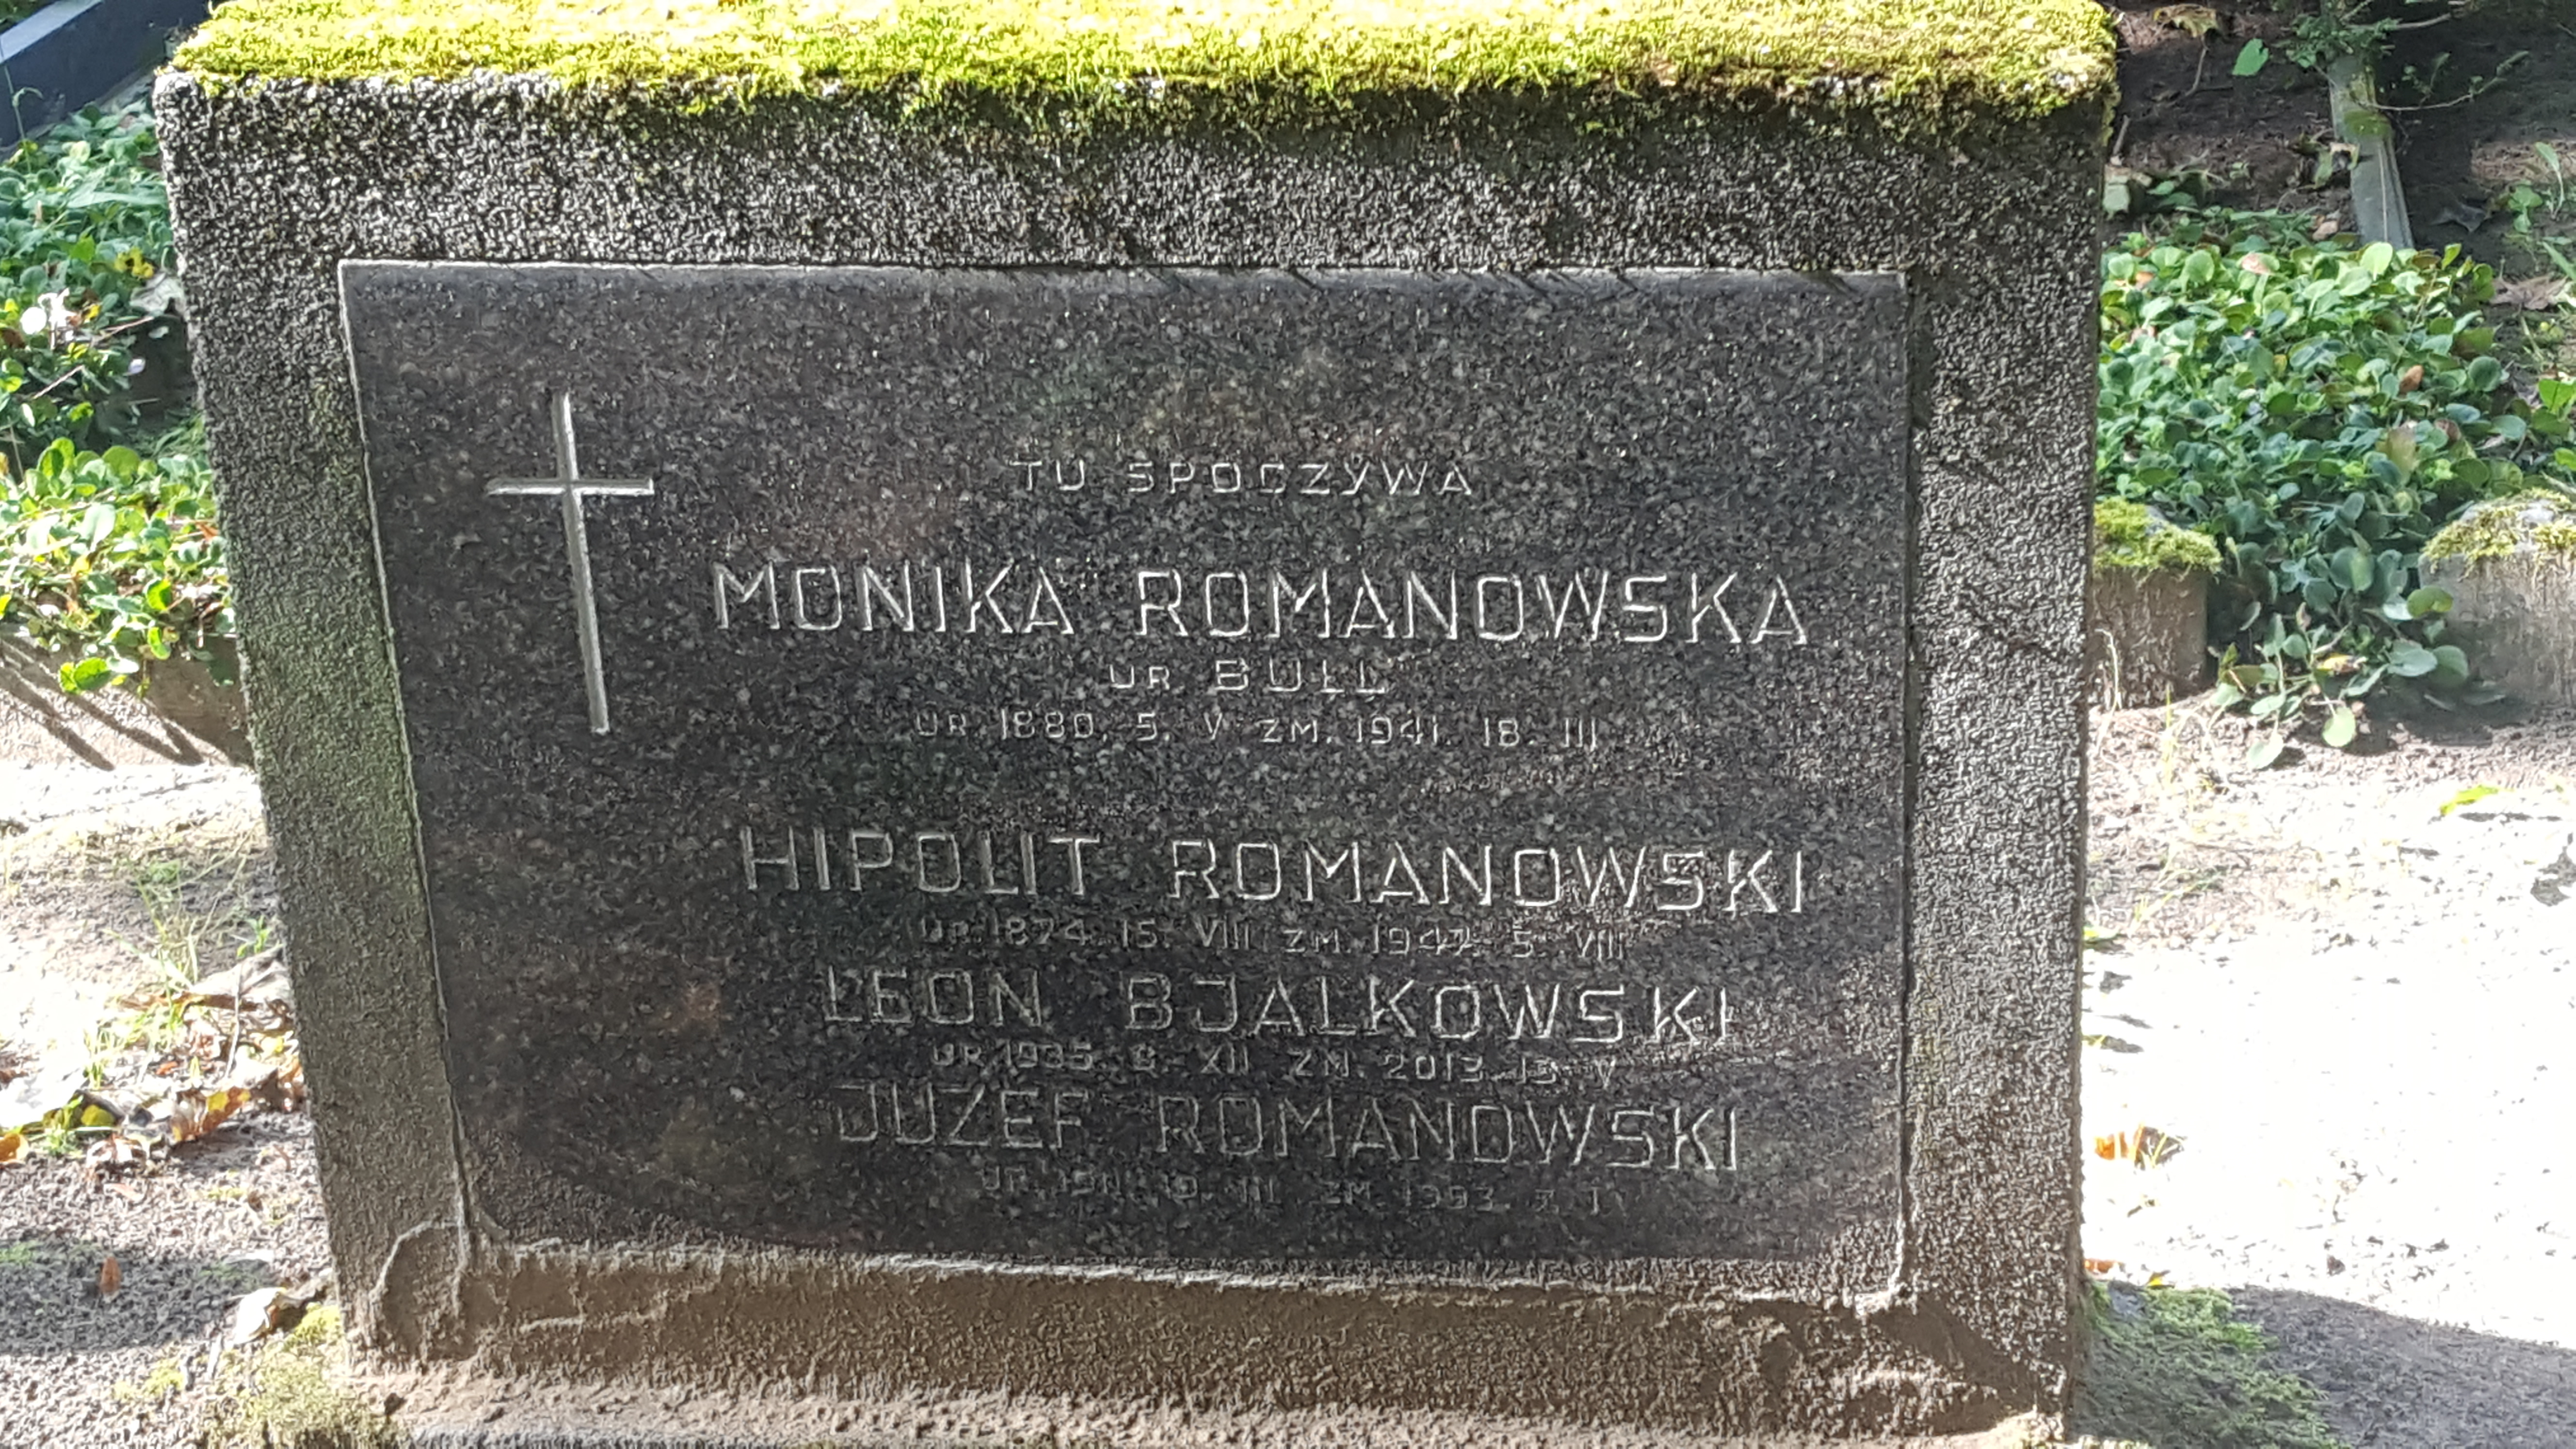 Tombstone of the Romanowski family and Leon Bjalkowski, St. Michael's cemetery in Riga, as of 2021